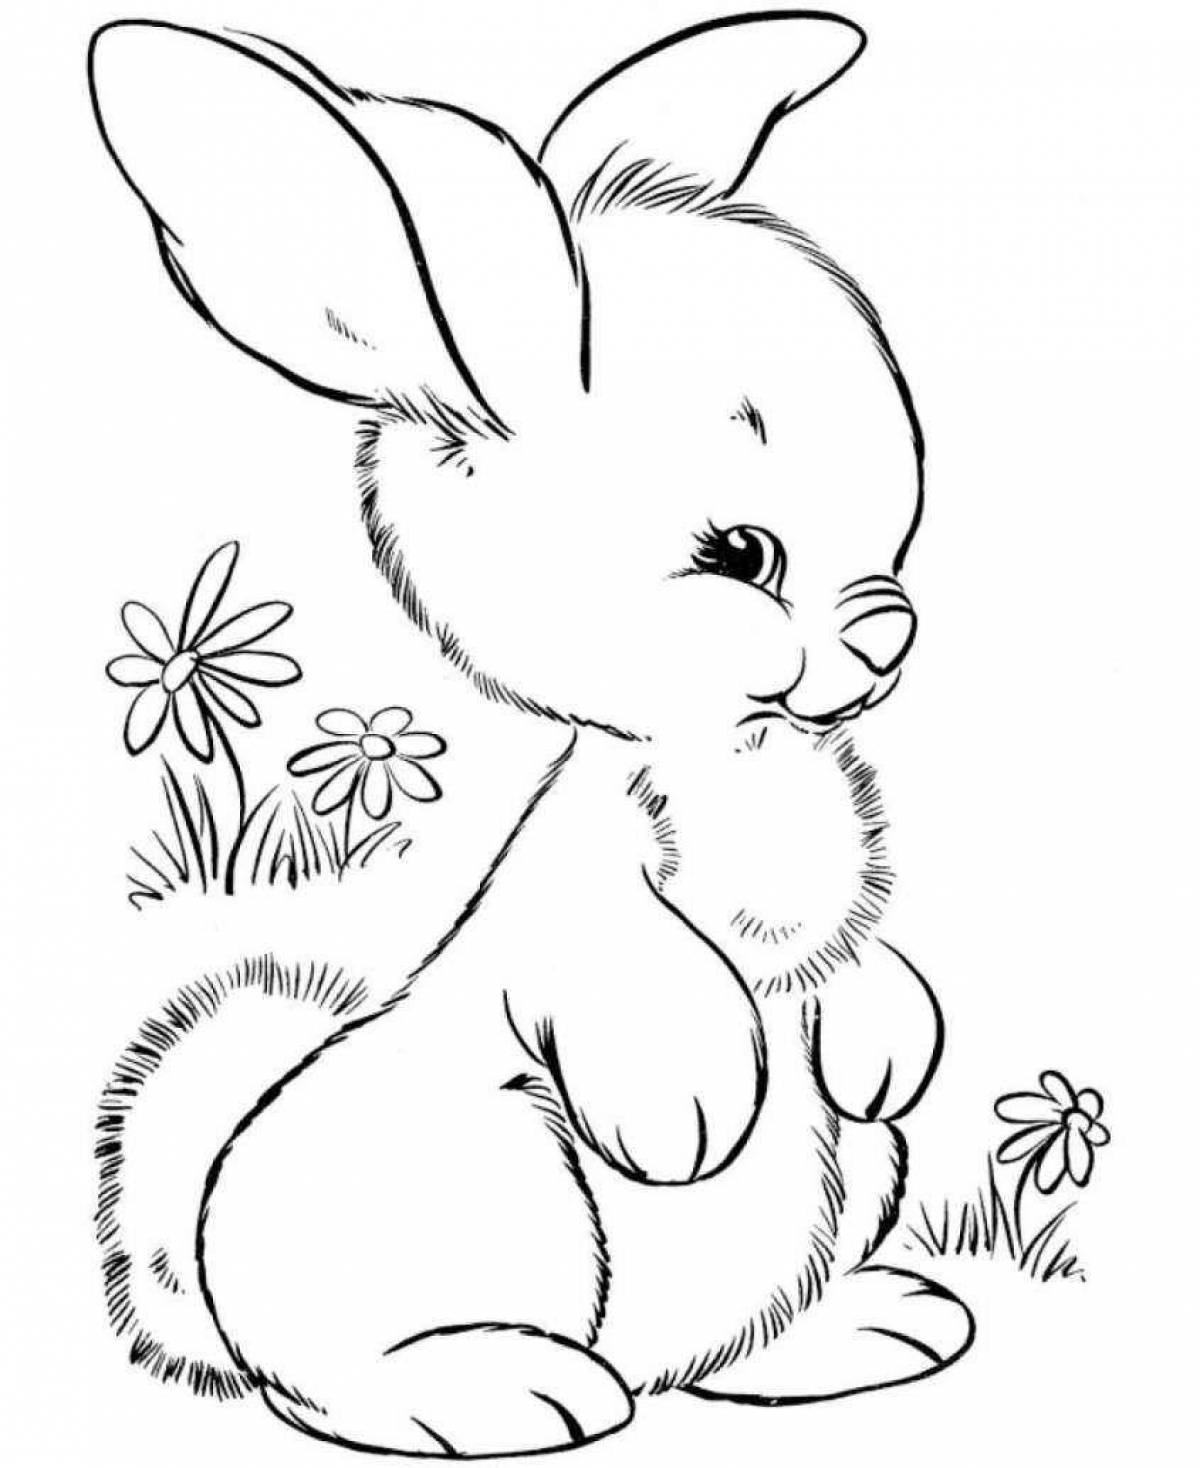 Rampant year of the rabbit coloring page